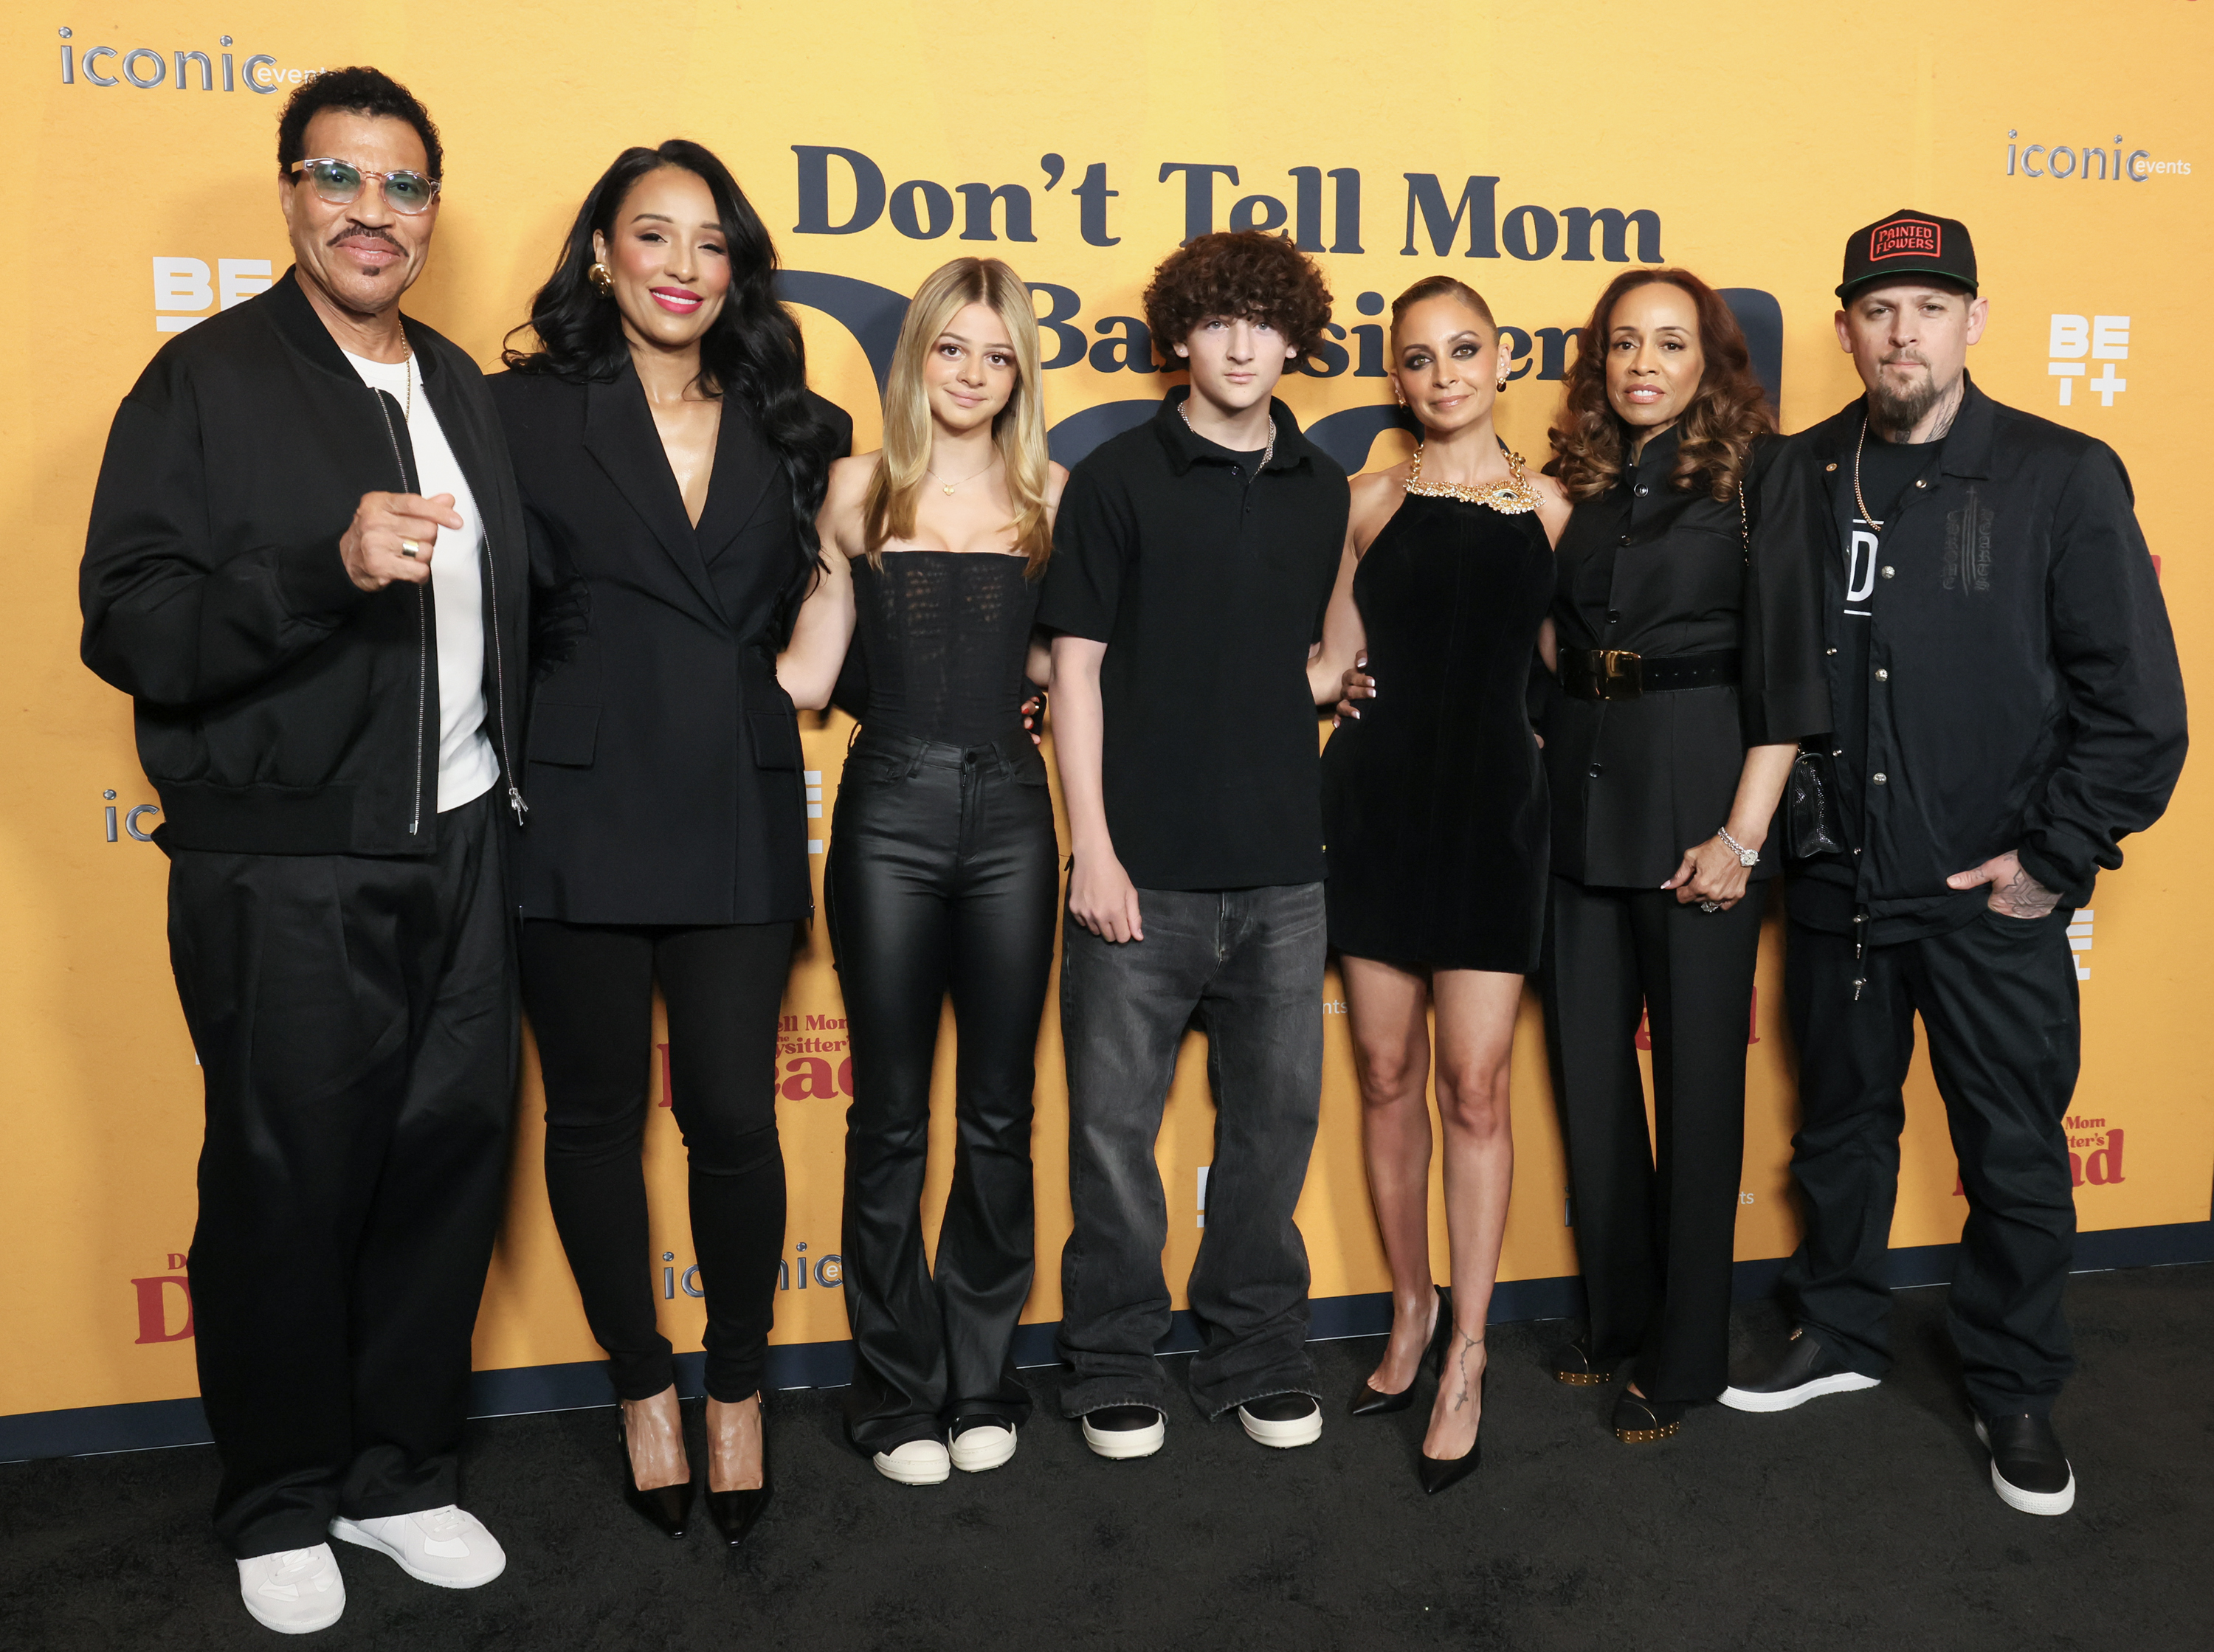 Lionel Richie, Lisa Parigi, Harlow Madden, Sparrow Madden, Nicole Richie, Brenda Harvey-Richie, and Joel Madden at the premiere of "Don't Tell Mom the Babysitter's Dead" in Los Angeles, California on April 2, 2024 | Source: Getty Images